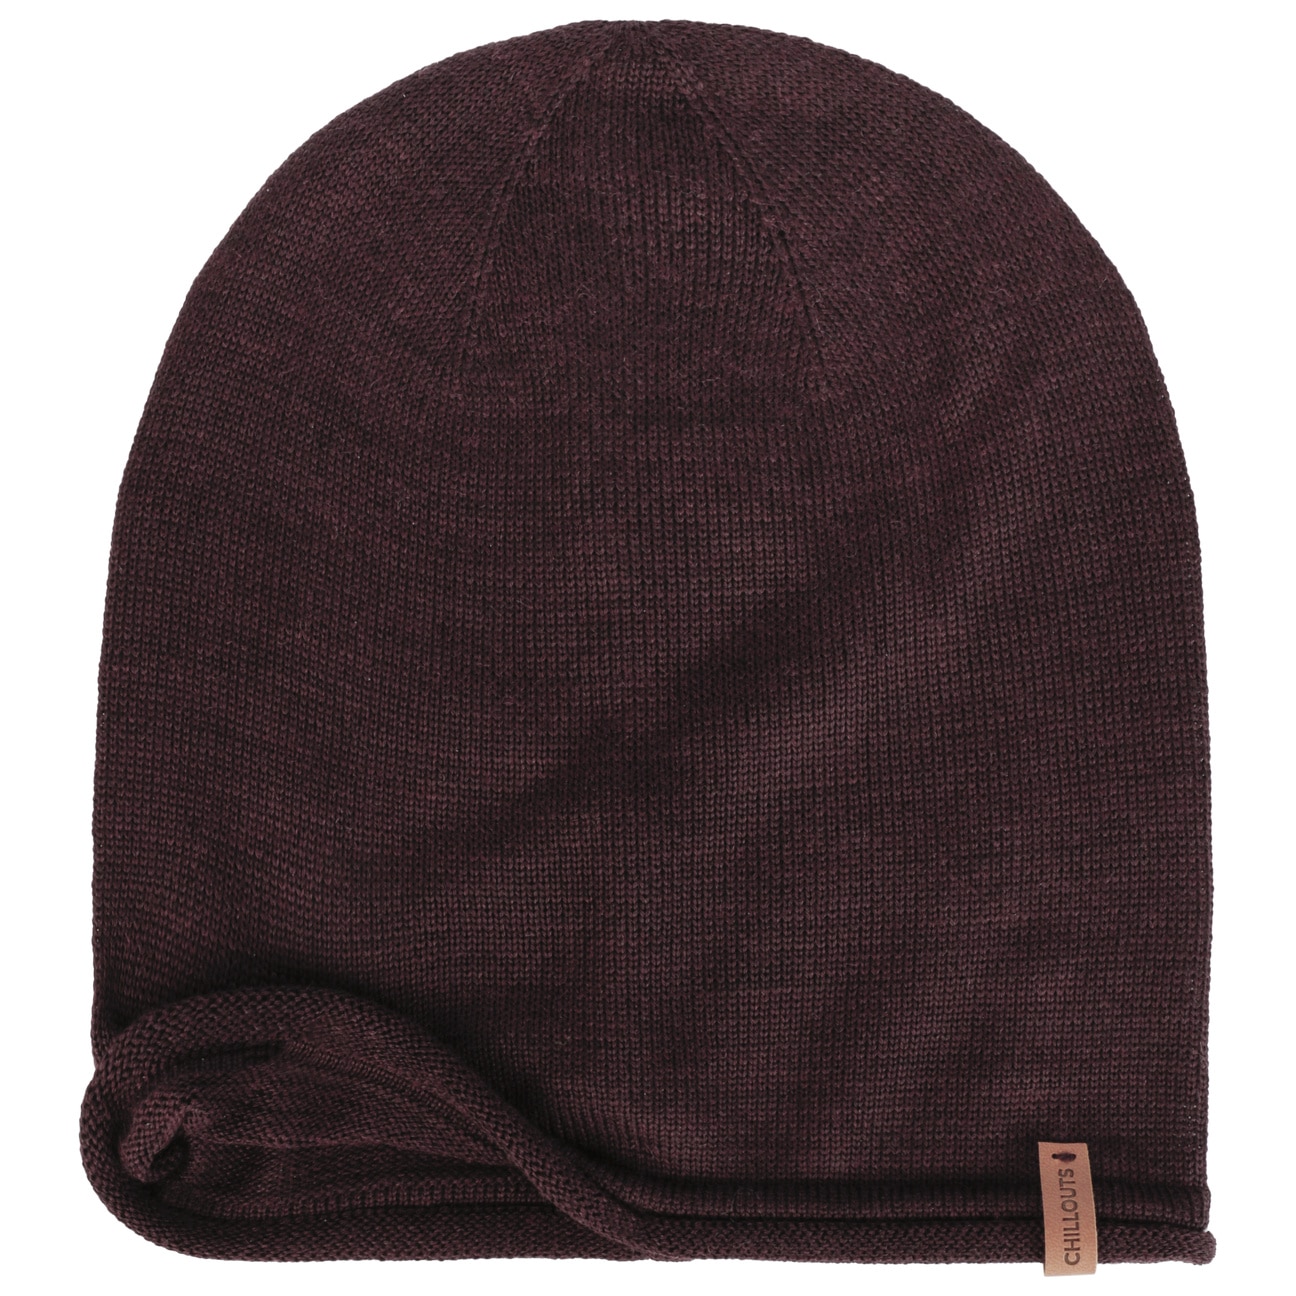 Leicester Beanie € by Chillouts - 27,99 Berretto